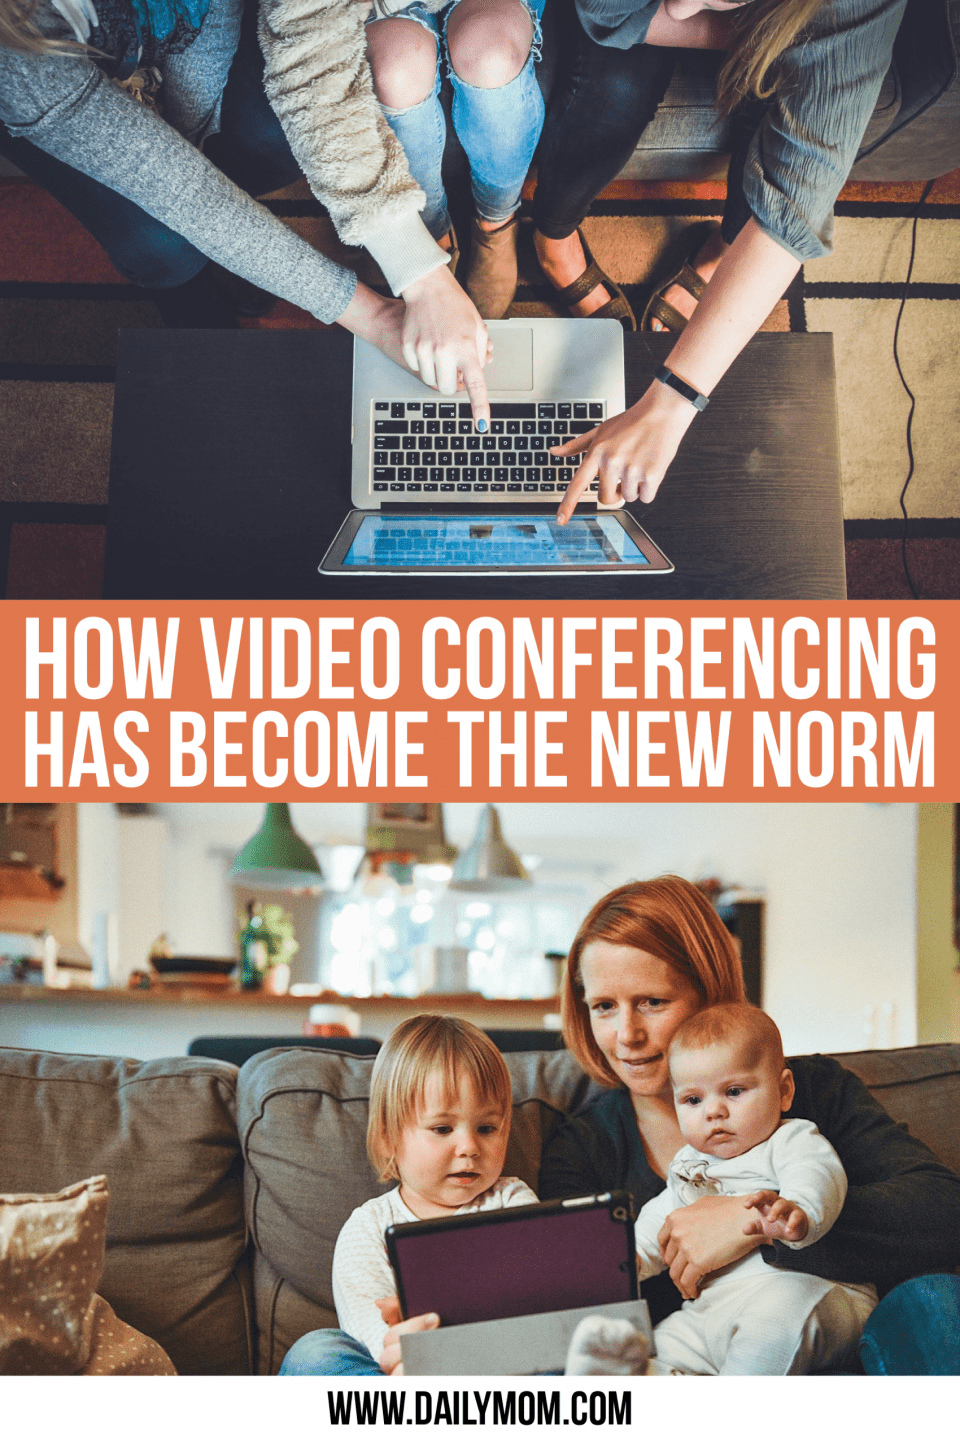 The Top 5 Apps For Video Conferencing In The New Norm